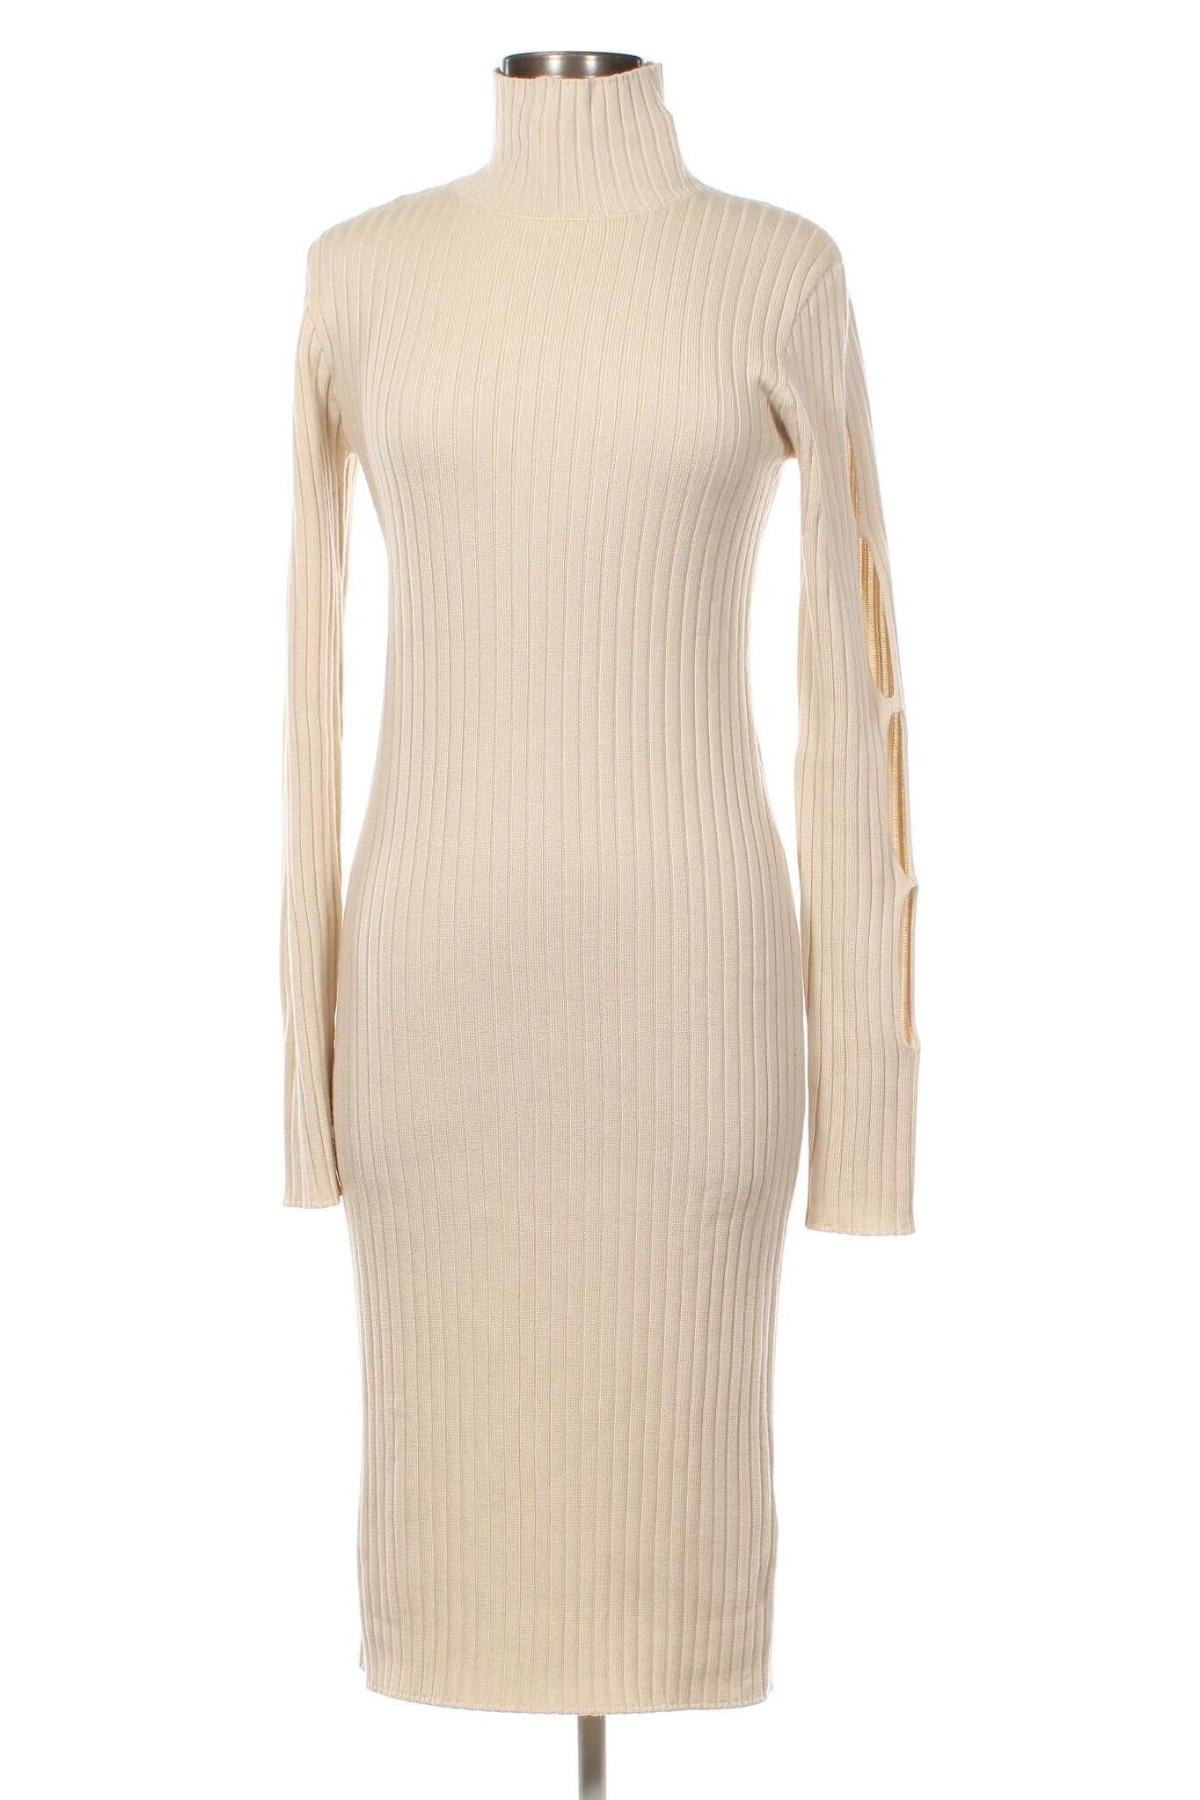 Kleid Katy Perry exclusive for ABOUT YOU, Größe M, Farbe Beige, Preis 30,62 €